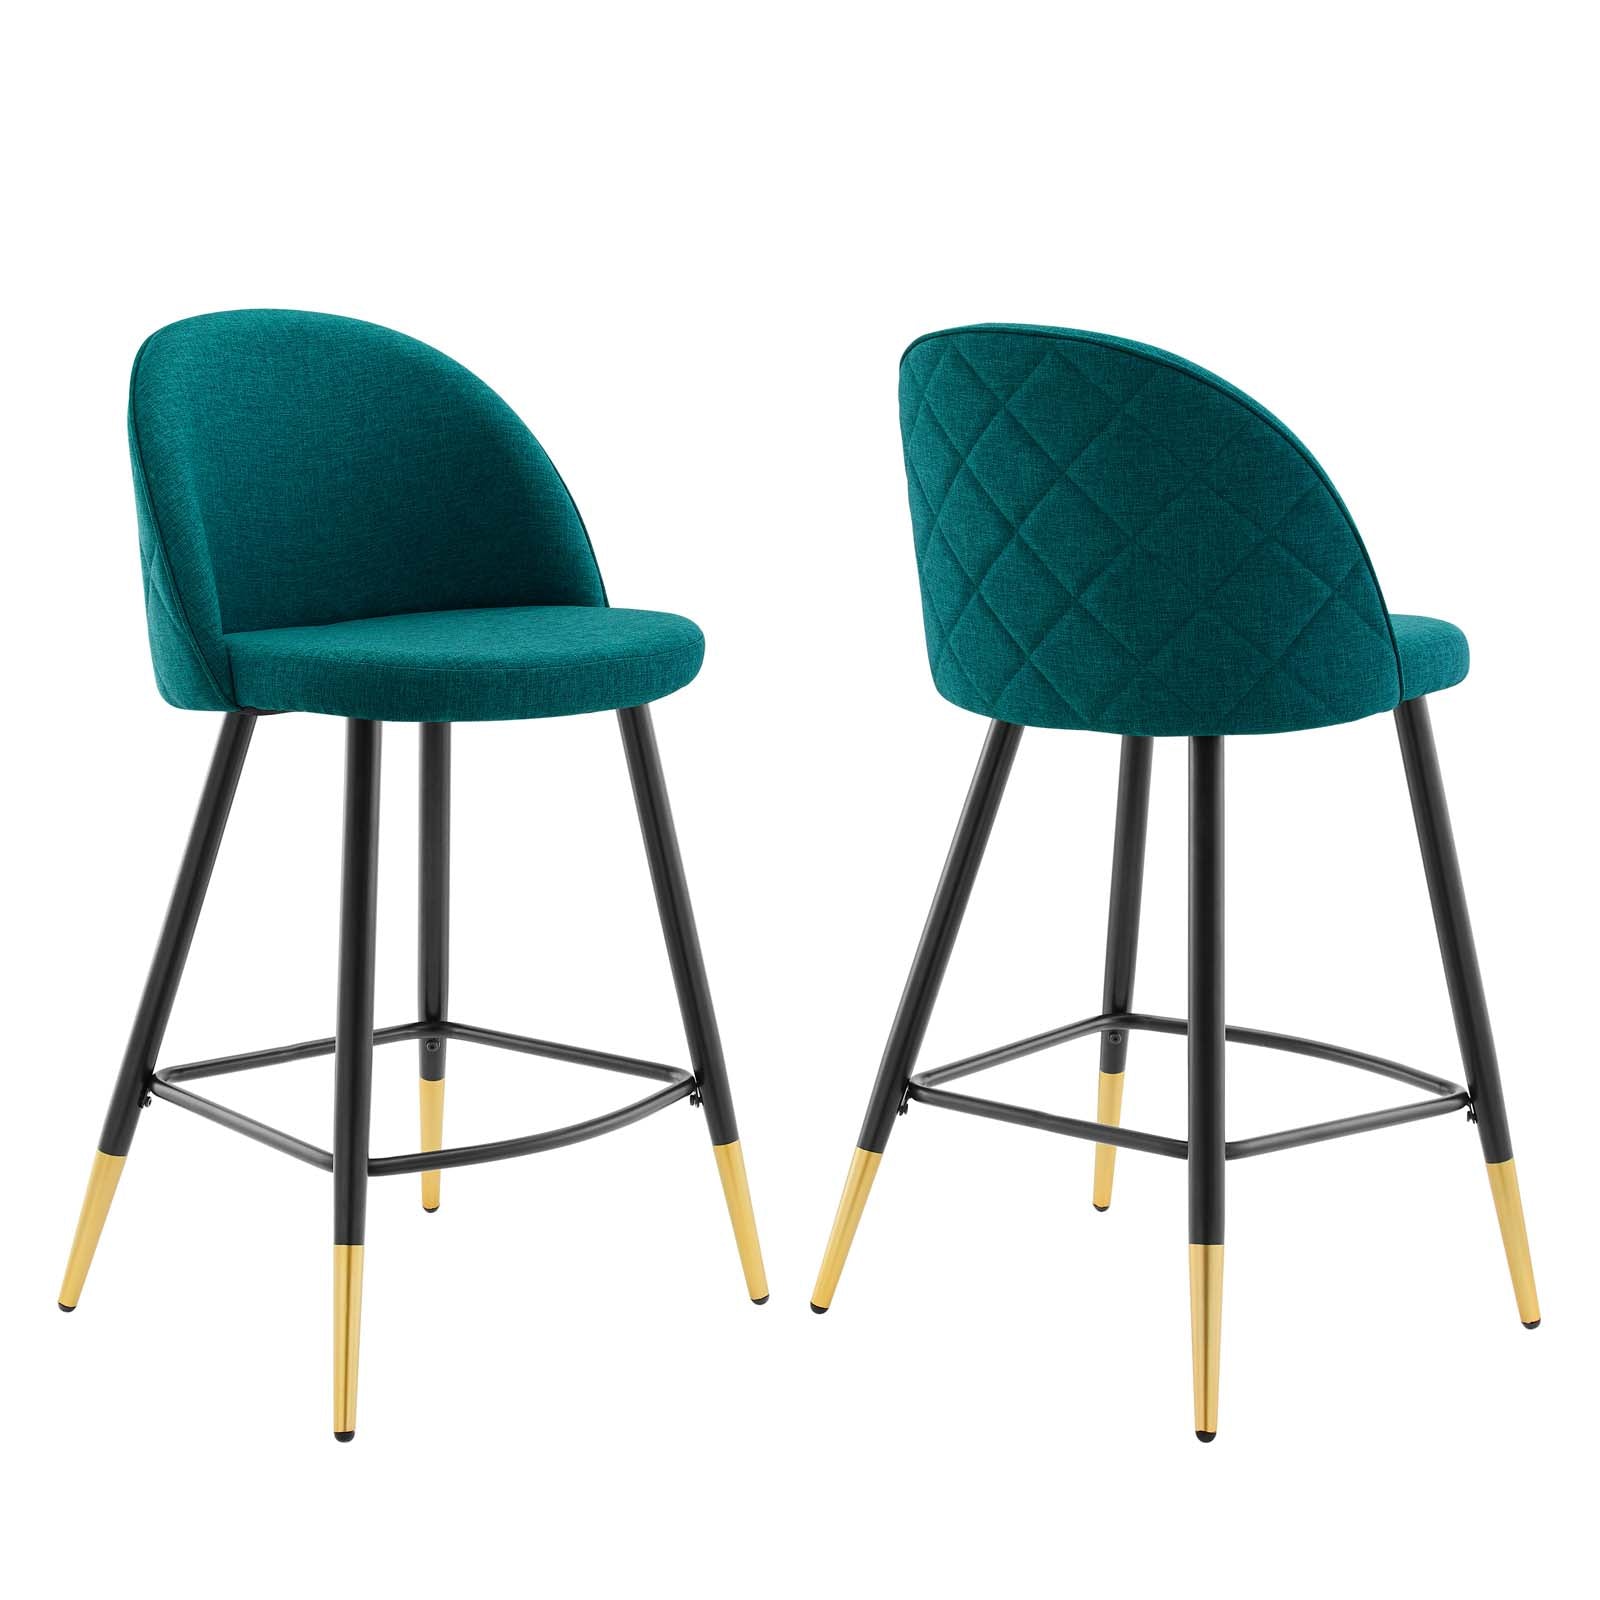 Modway Barstools - Cordial Fabric Counter Stools - ( Set of 2 ) Teal